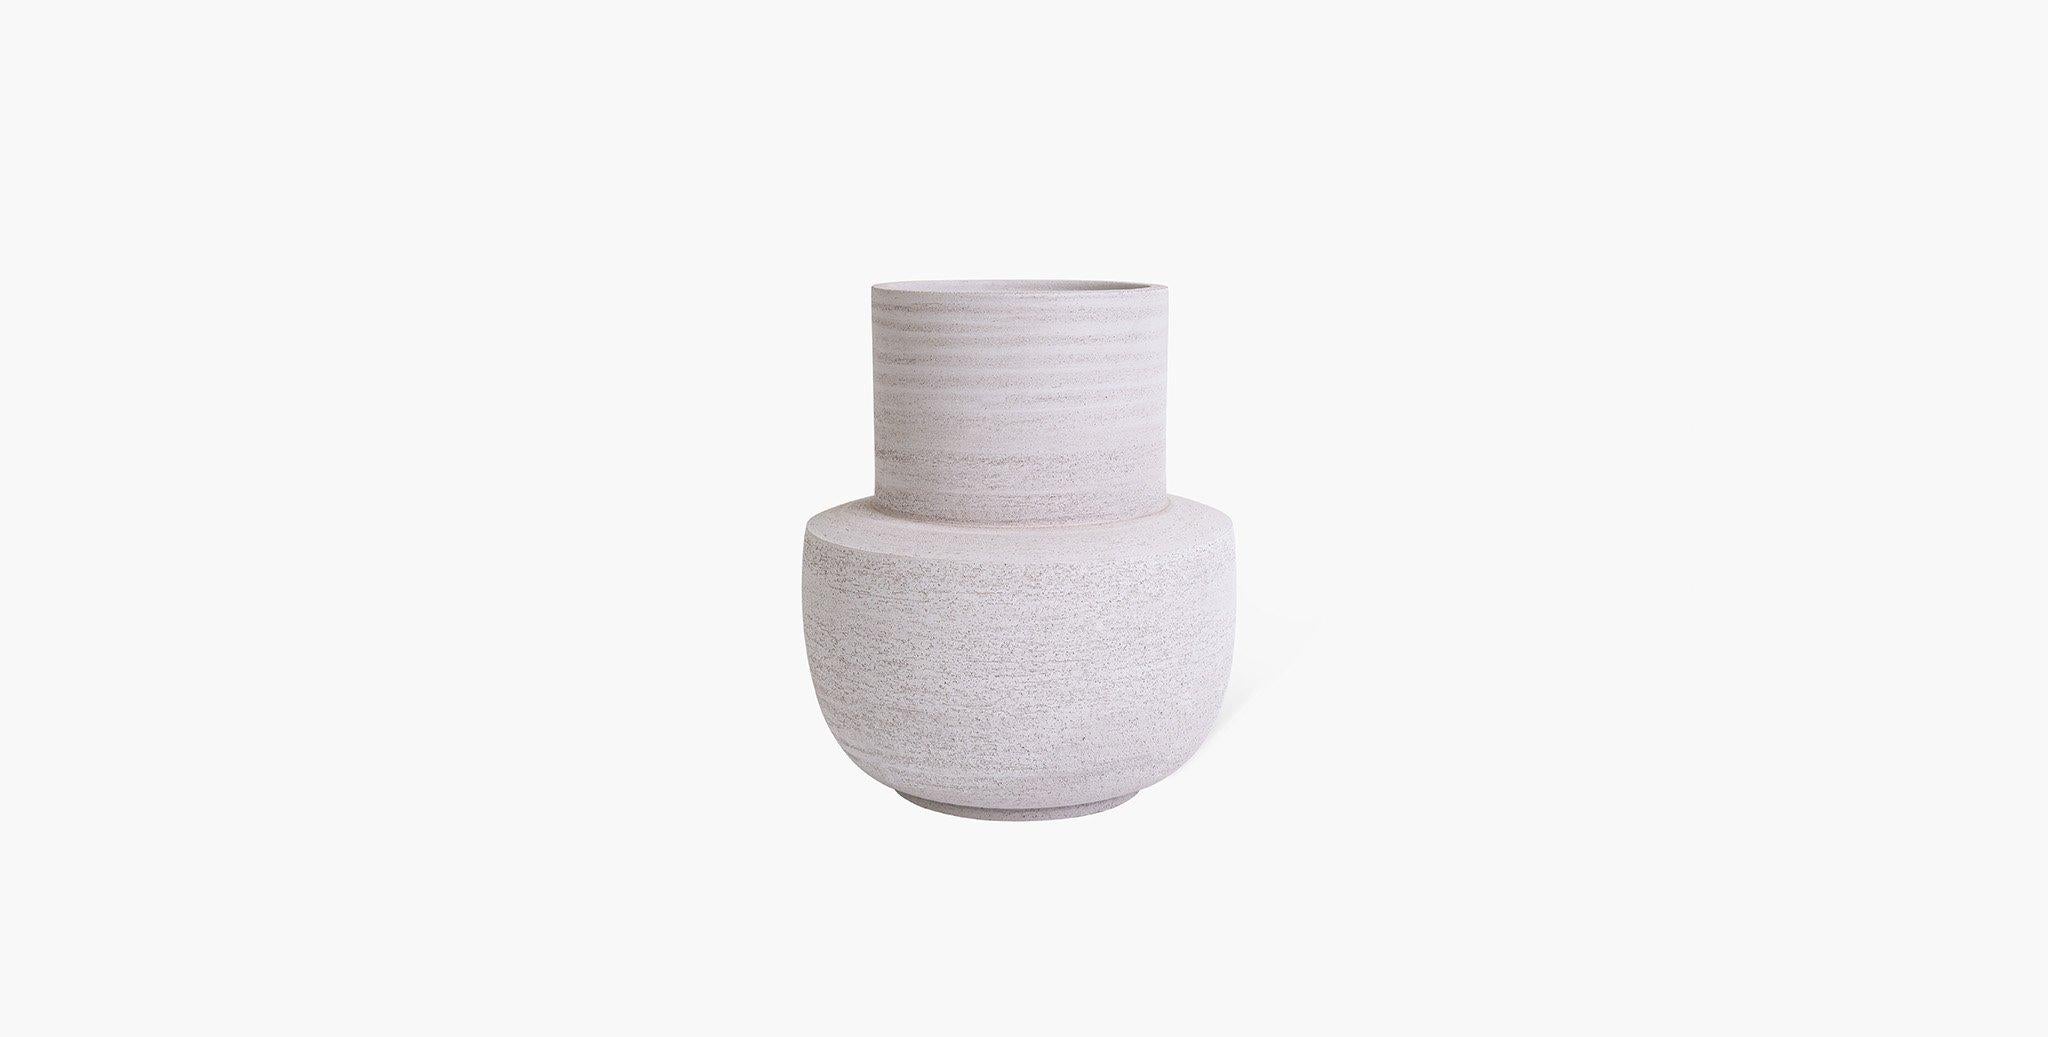 The Aeron Stoneware Vase Collection is the sublime meeting of form and function. Classic silhouettes are transformed in Stoneware clay into their most simplest form while maintaining a bold presence. A neutral earth palette was chosen to highlight